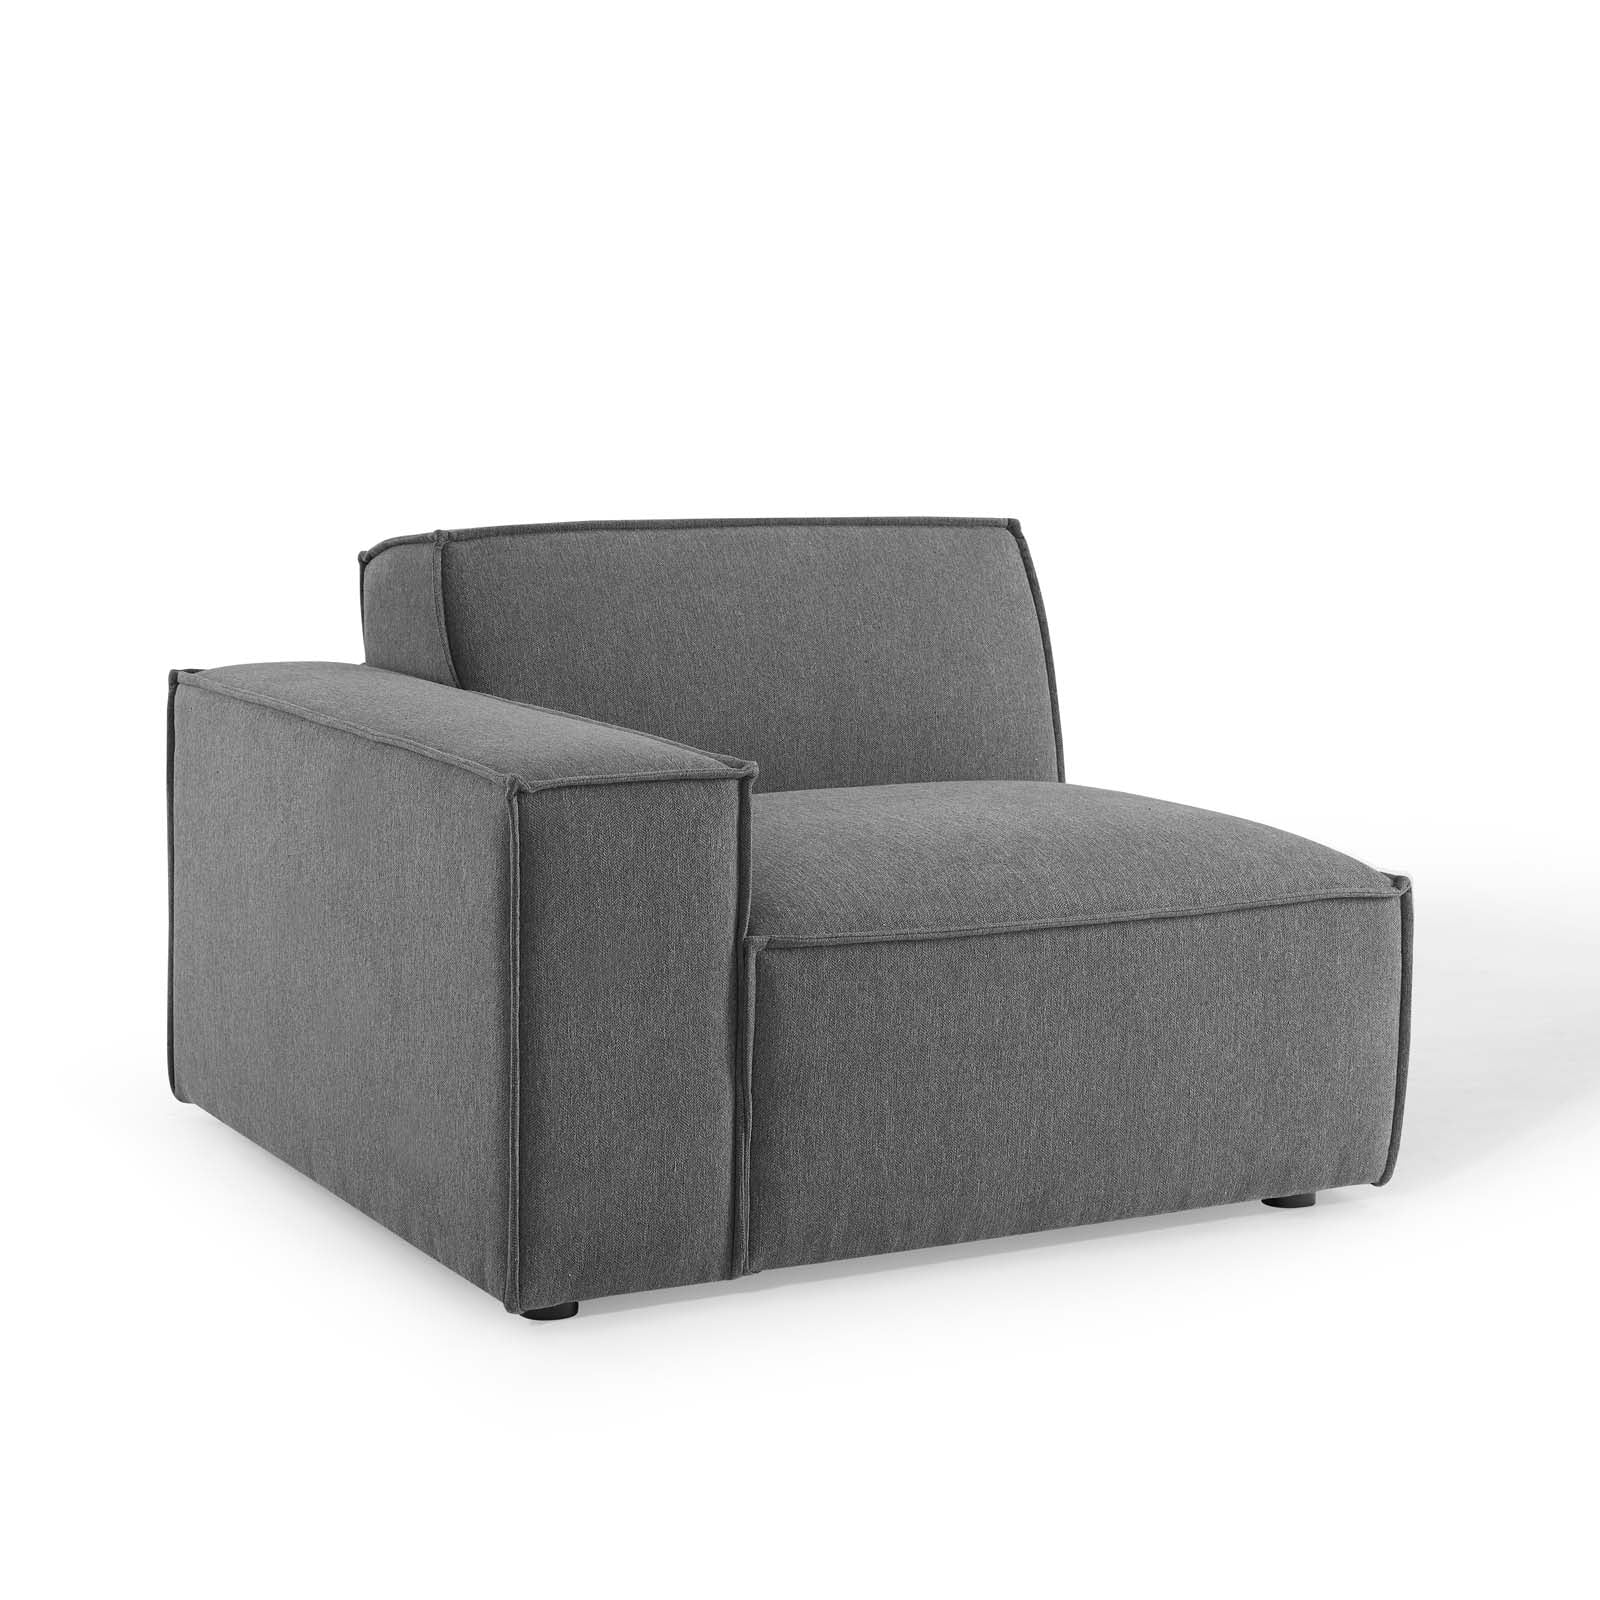 Modway Sectional Sofas - Restore 7-Piece Sectional Sofa Charcoal